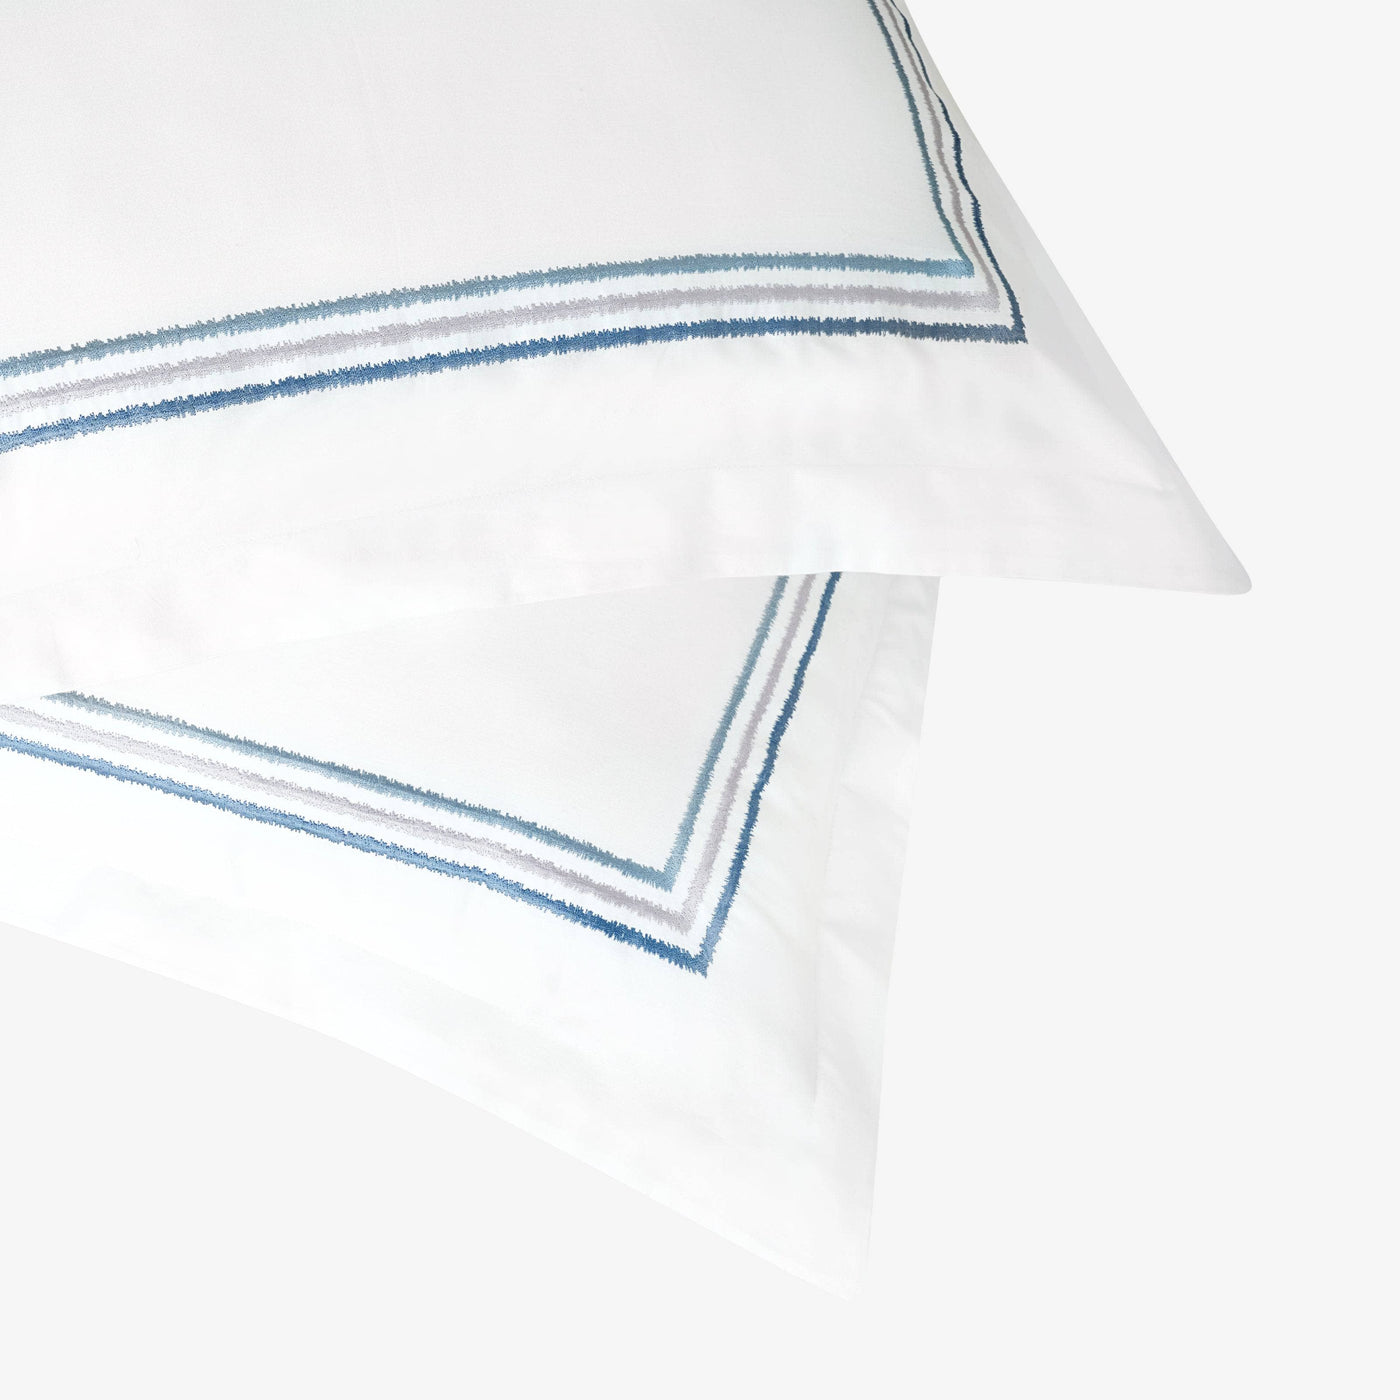 Darcy Embroidered 100% Turkish Cotton 210 TC Duvet Cover + Fitted Sheet + 4 Pillowcases, White - Blue, Super King Size Bedding Sets sazy.com